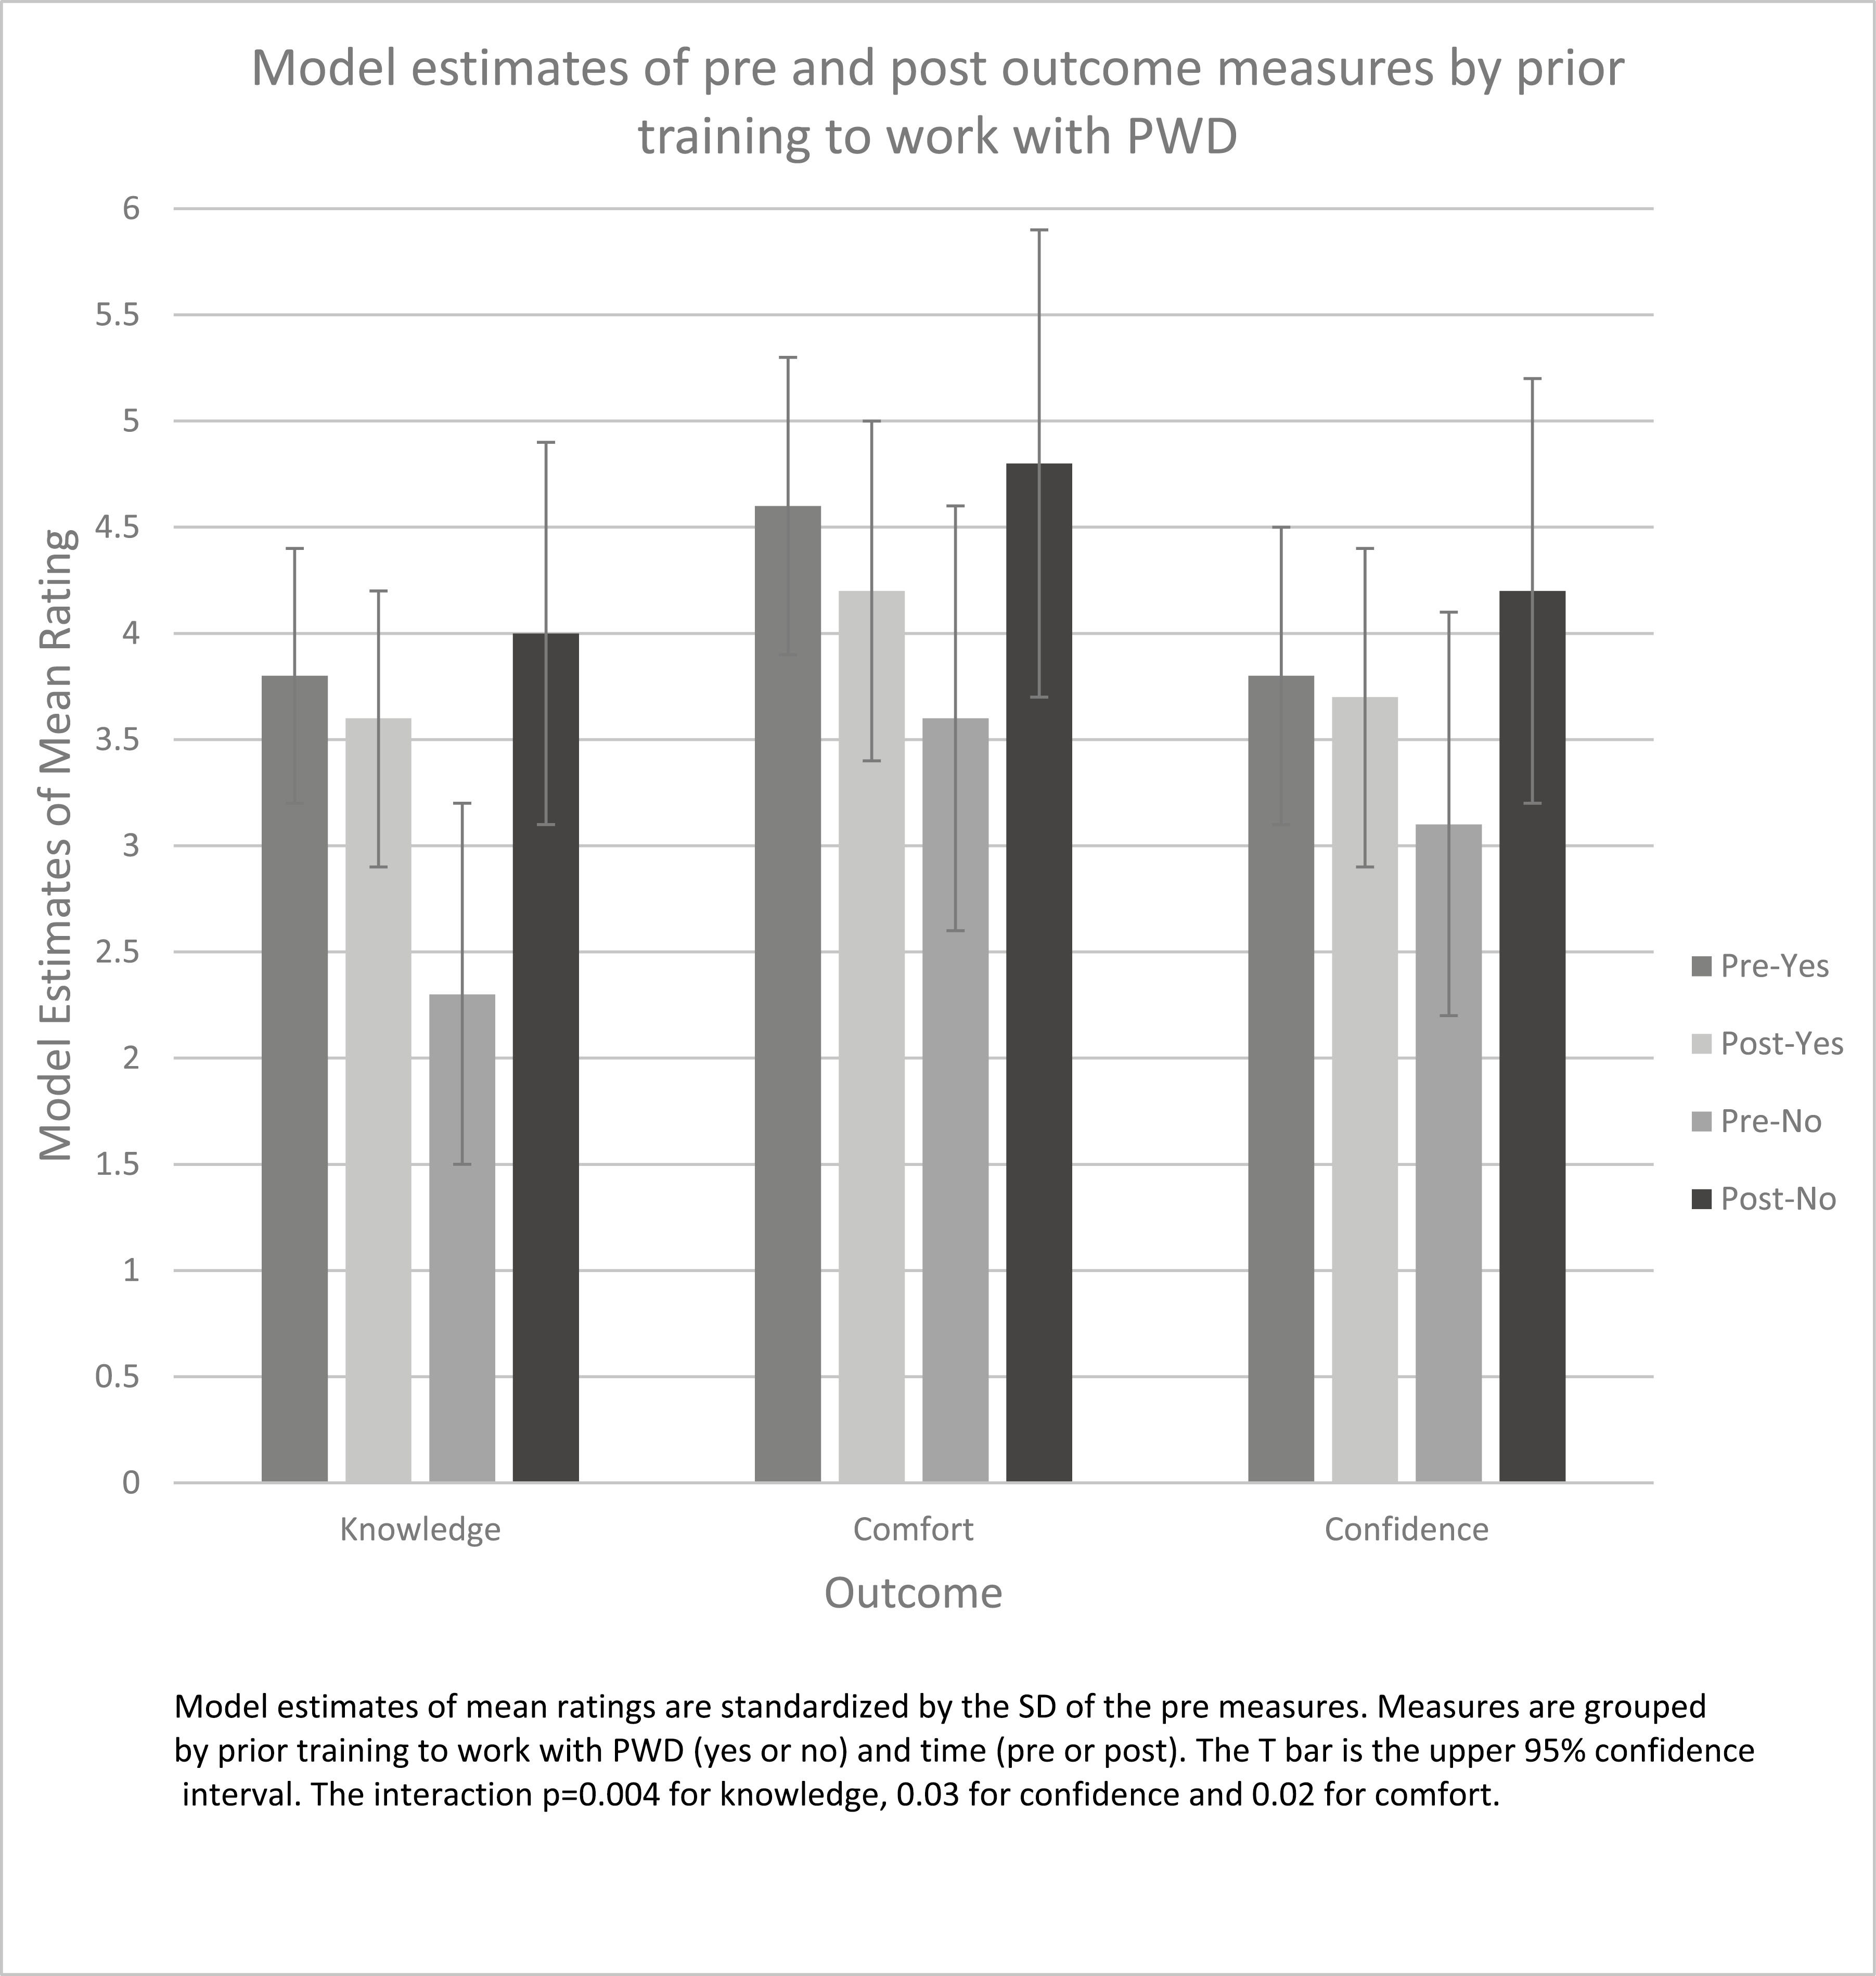 Model estimates of pre- and post-outcome measures by prior training to work with PWD.